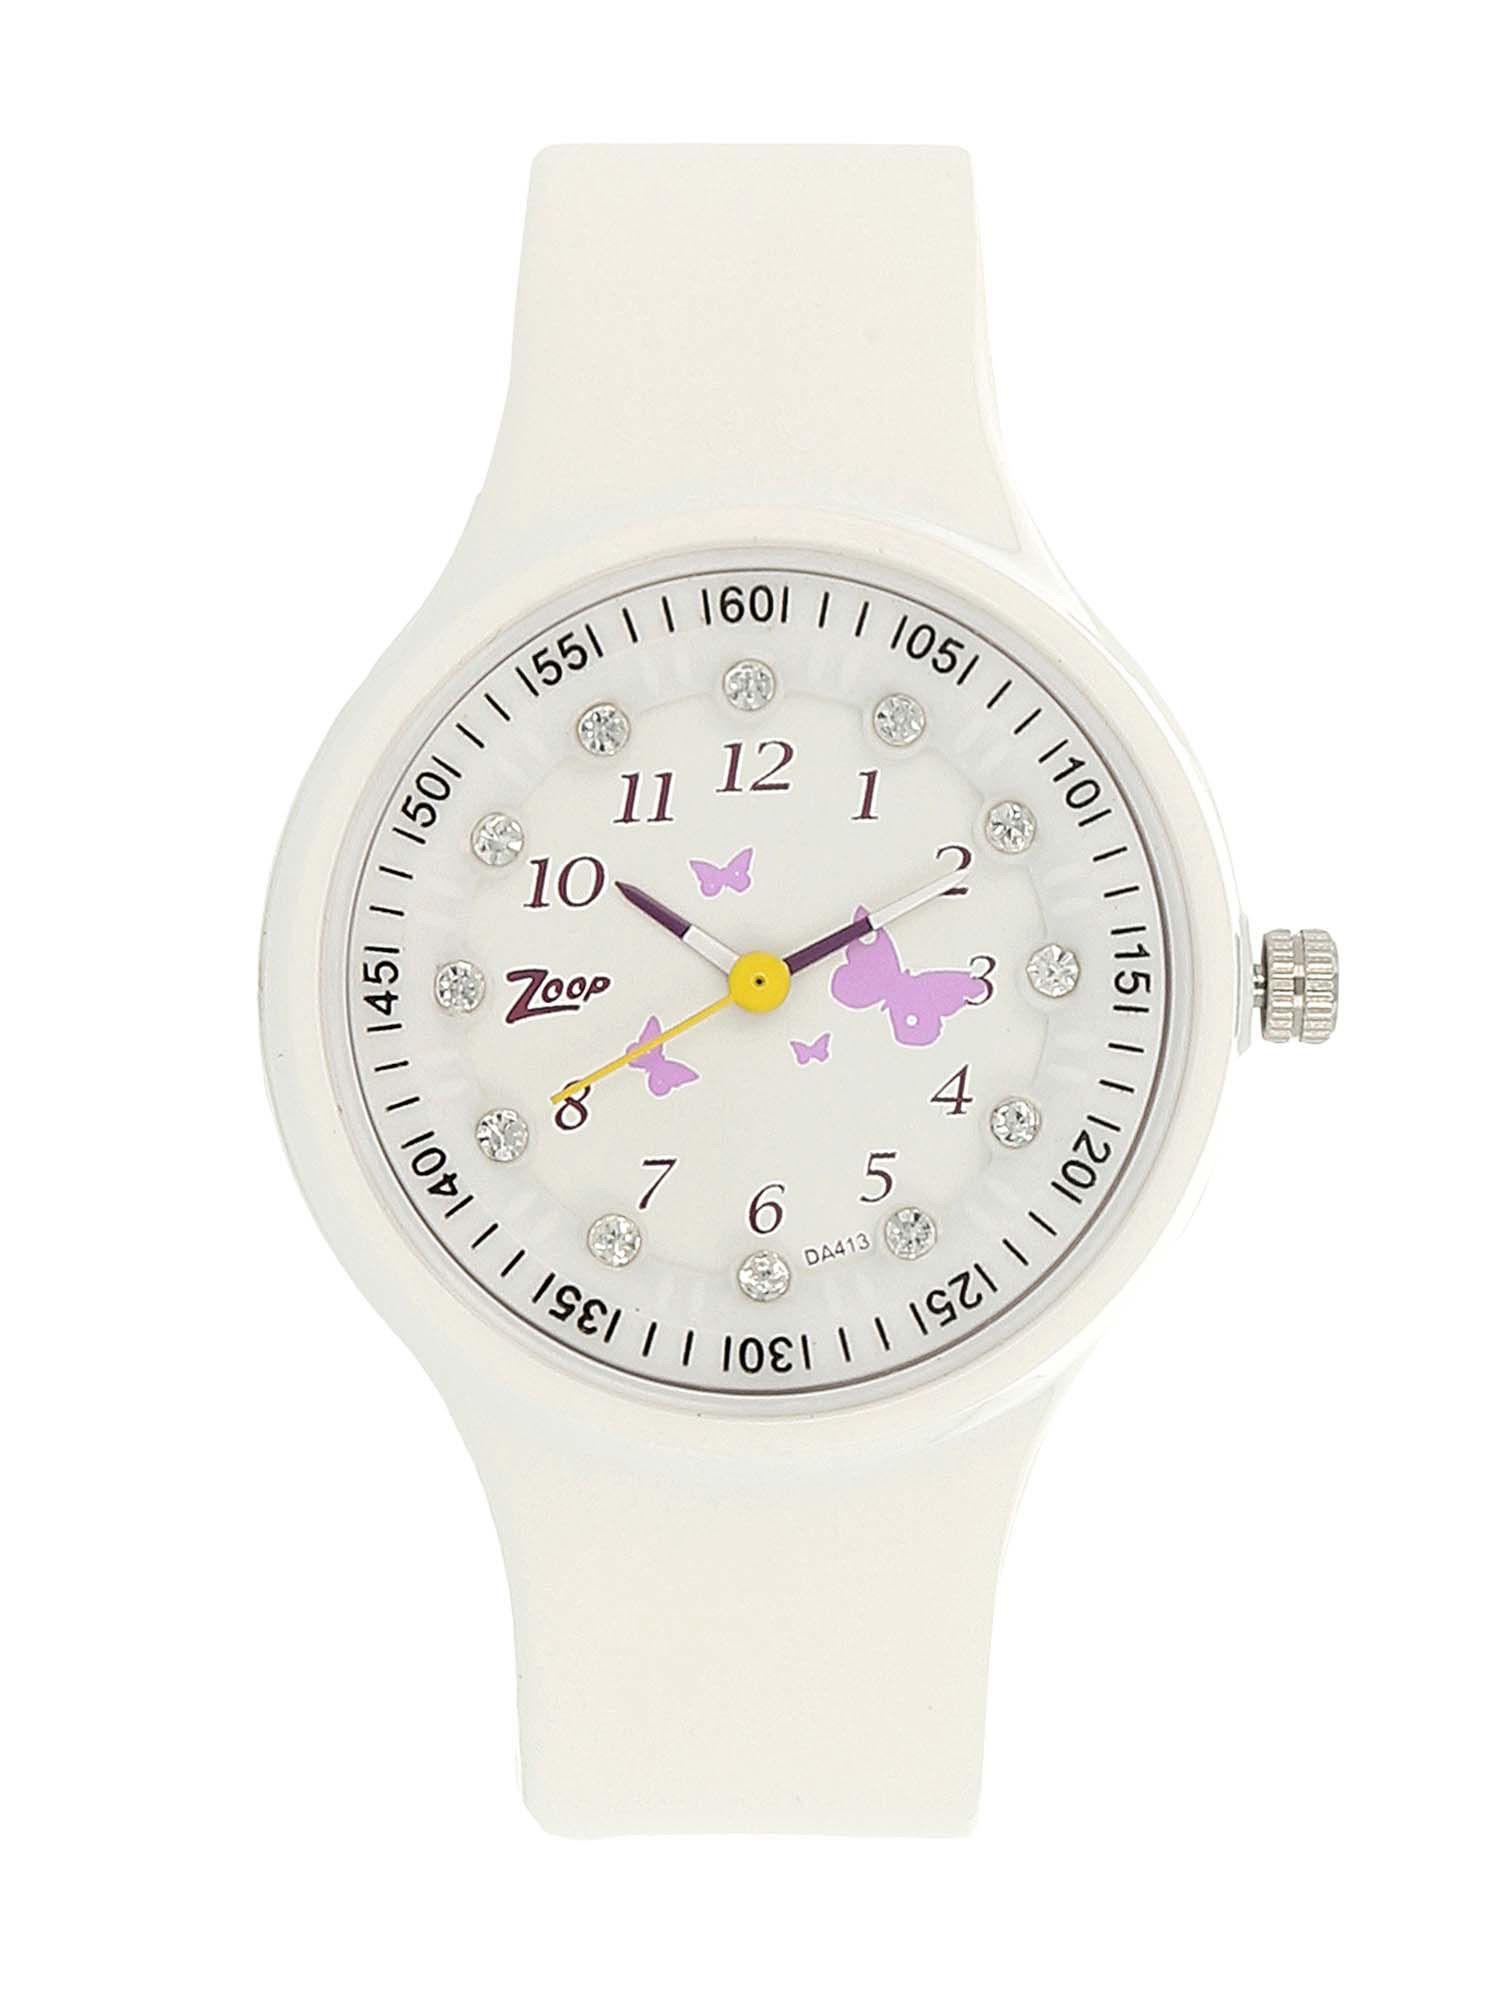 white dial watch with plastic case